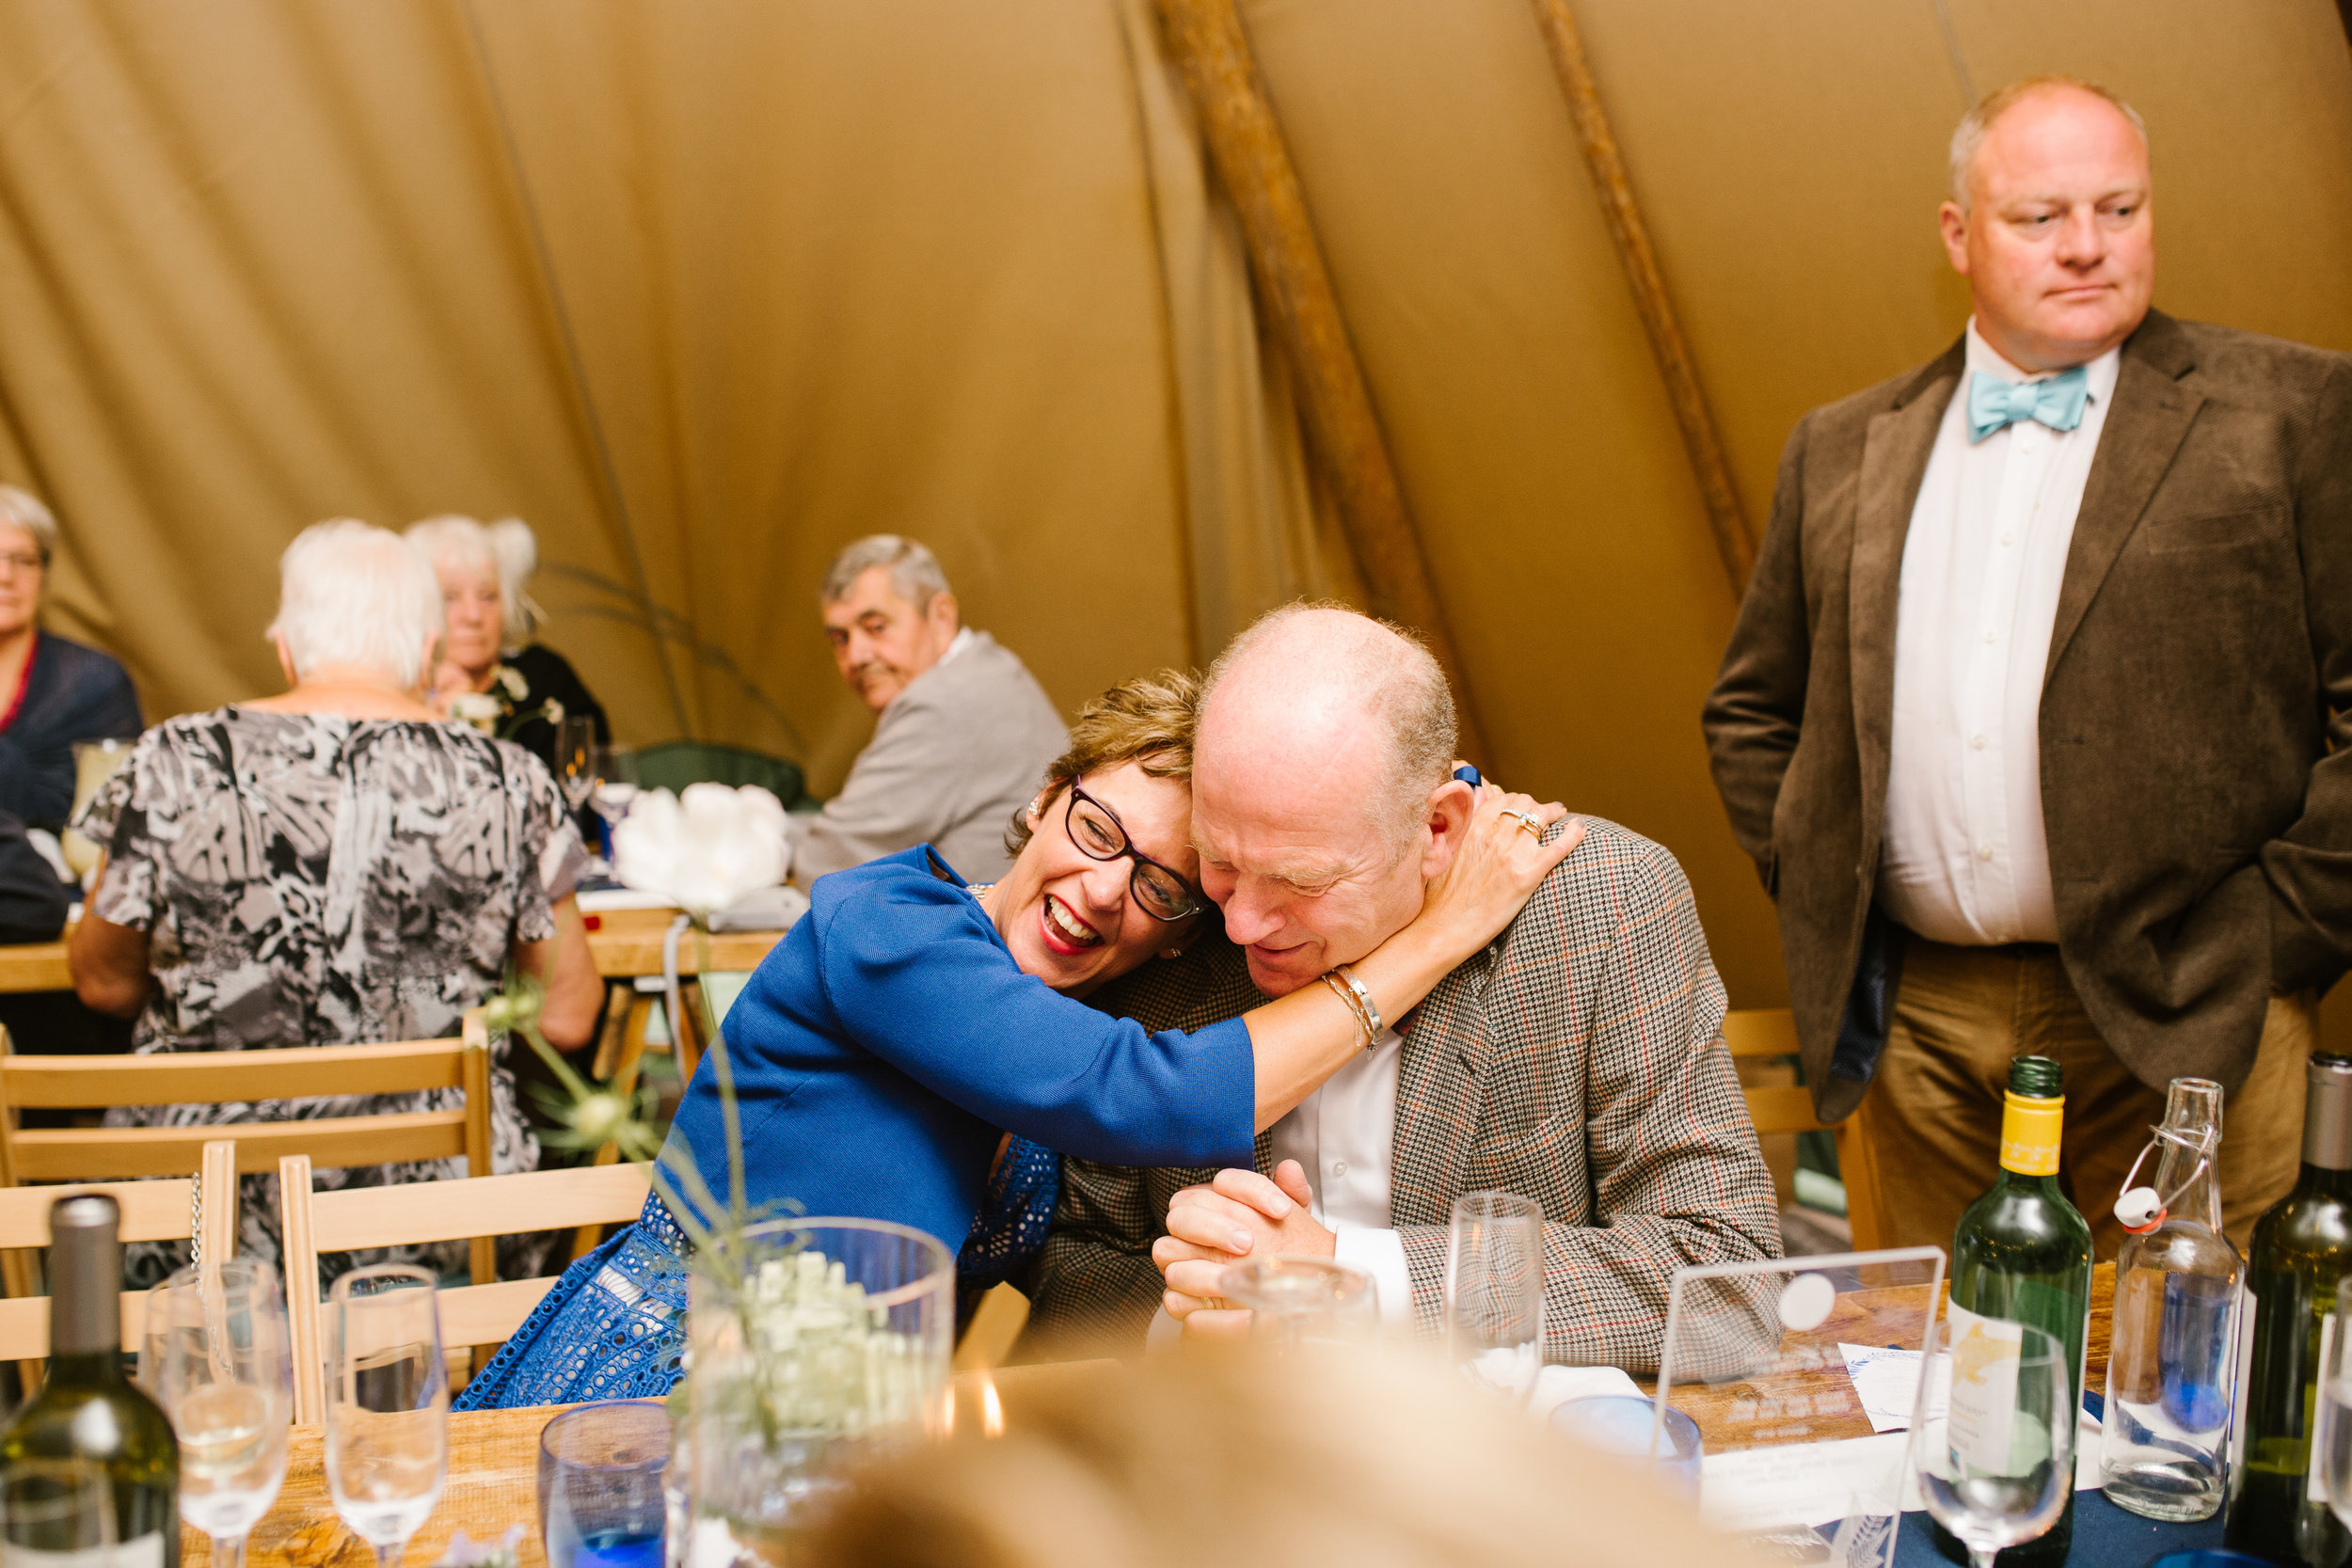 natural photo of wedding guests hugging one another during the wedding speeches